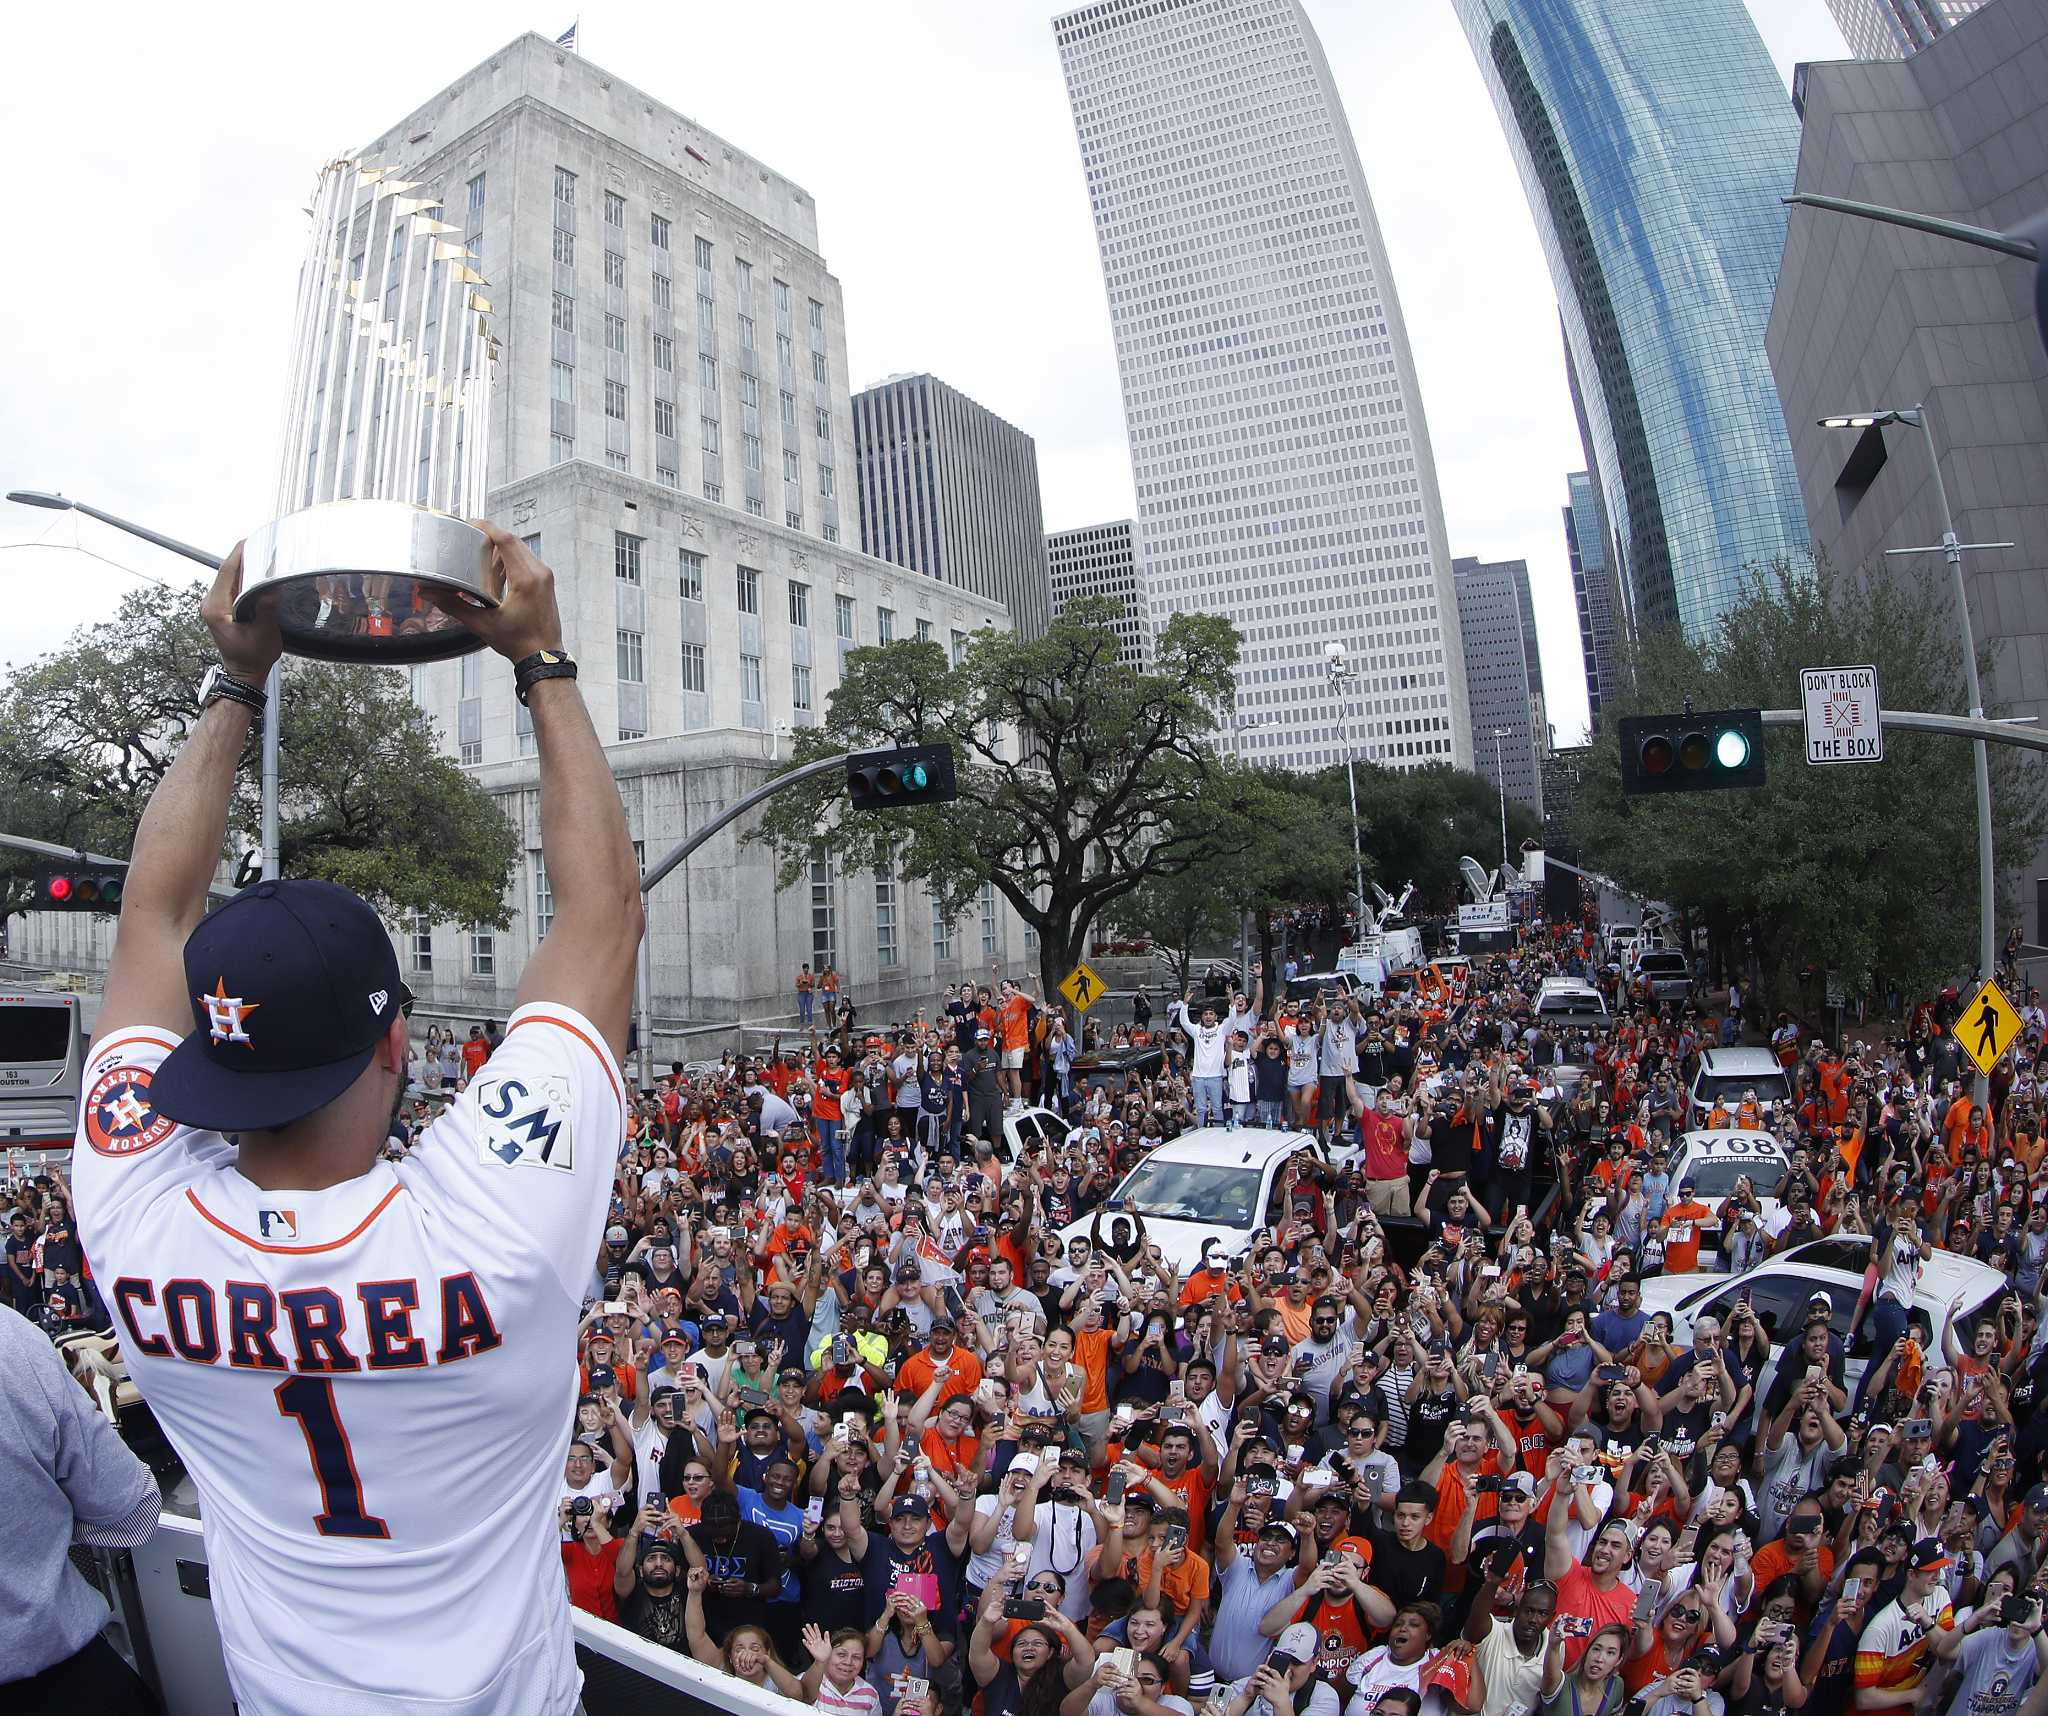 When is the Houston Astros' World Series parade?